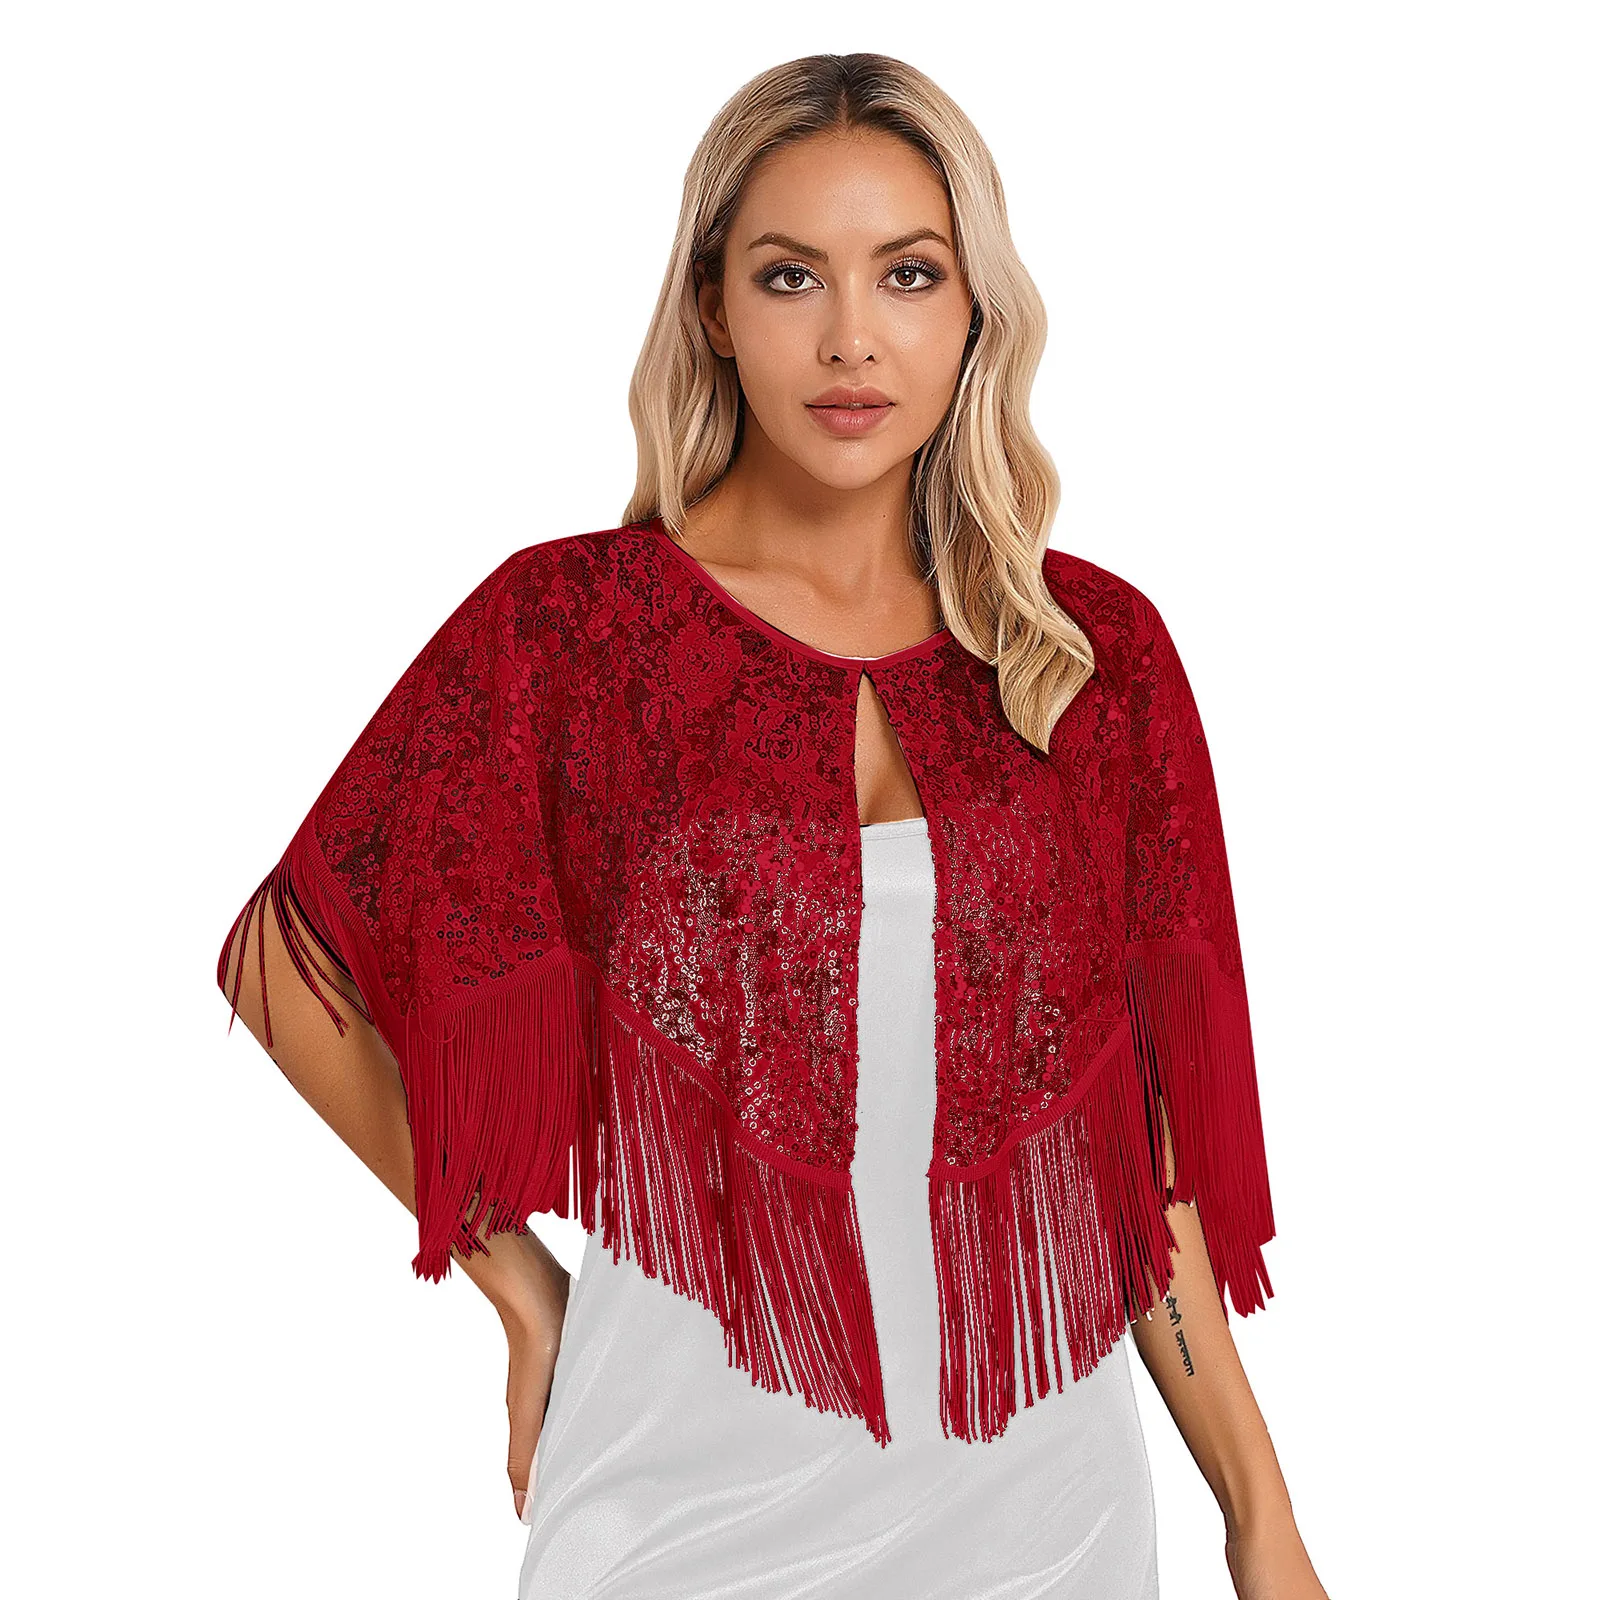 

Womens Sequin Fringed Cardigan Tassel Sheer Lace Bolero Shawl Wraps Dance Tops Shrug Cover Ups for Dancing Wedding Party